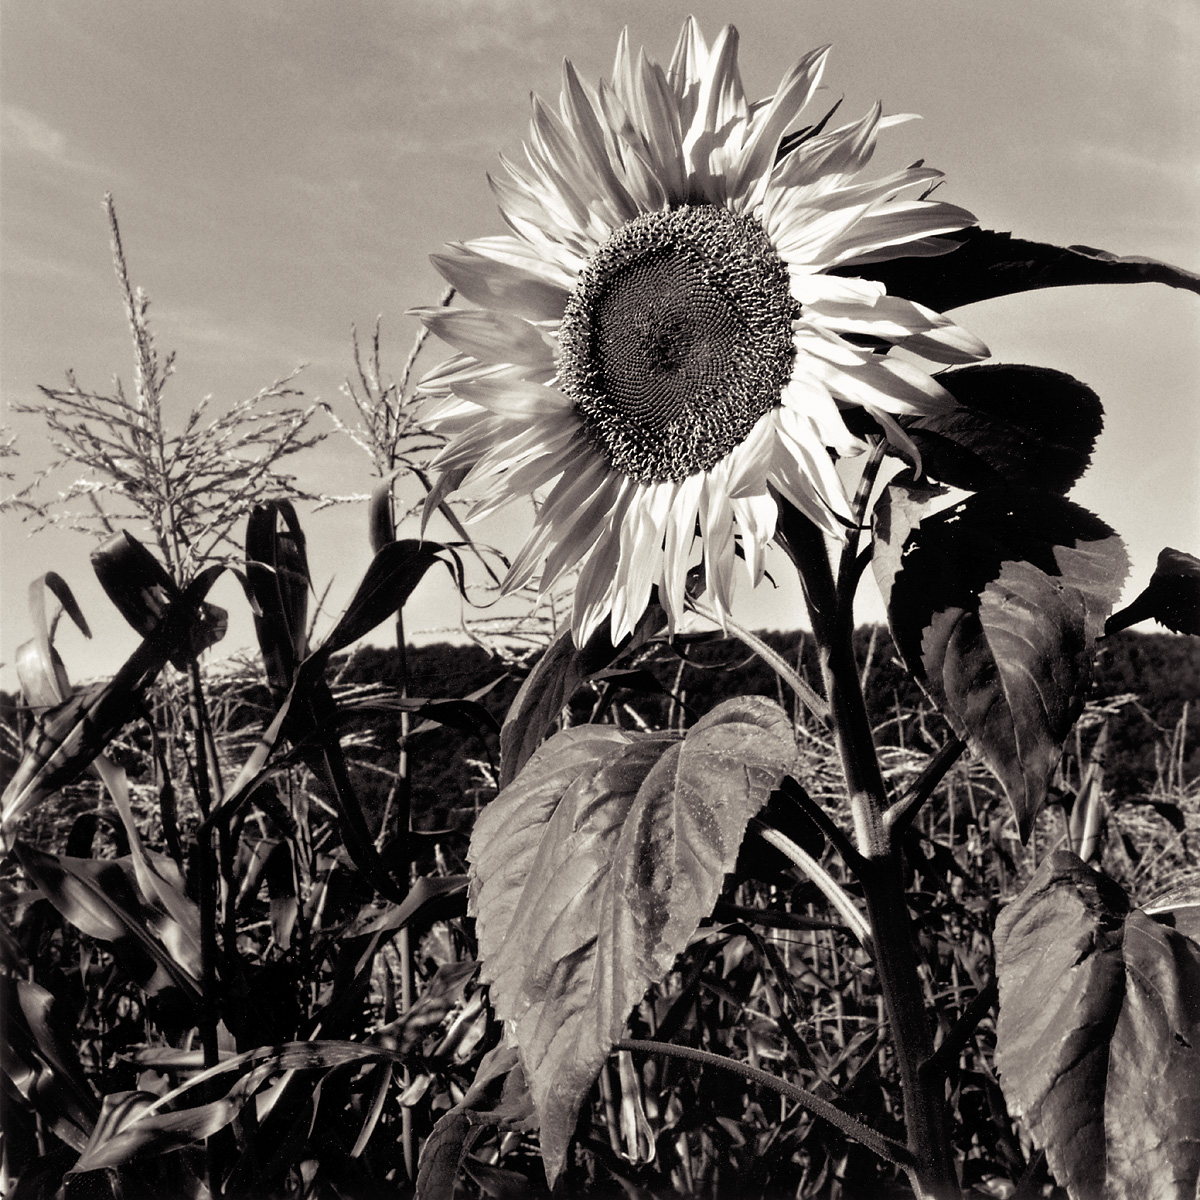 Stephen Austin Welch commercial director & advertising and fine art landscape photographer sunflower B&W black and white sepia selenium duo-toned photography: moody and dramatic fine art photographs